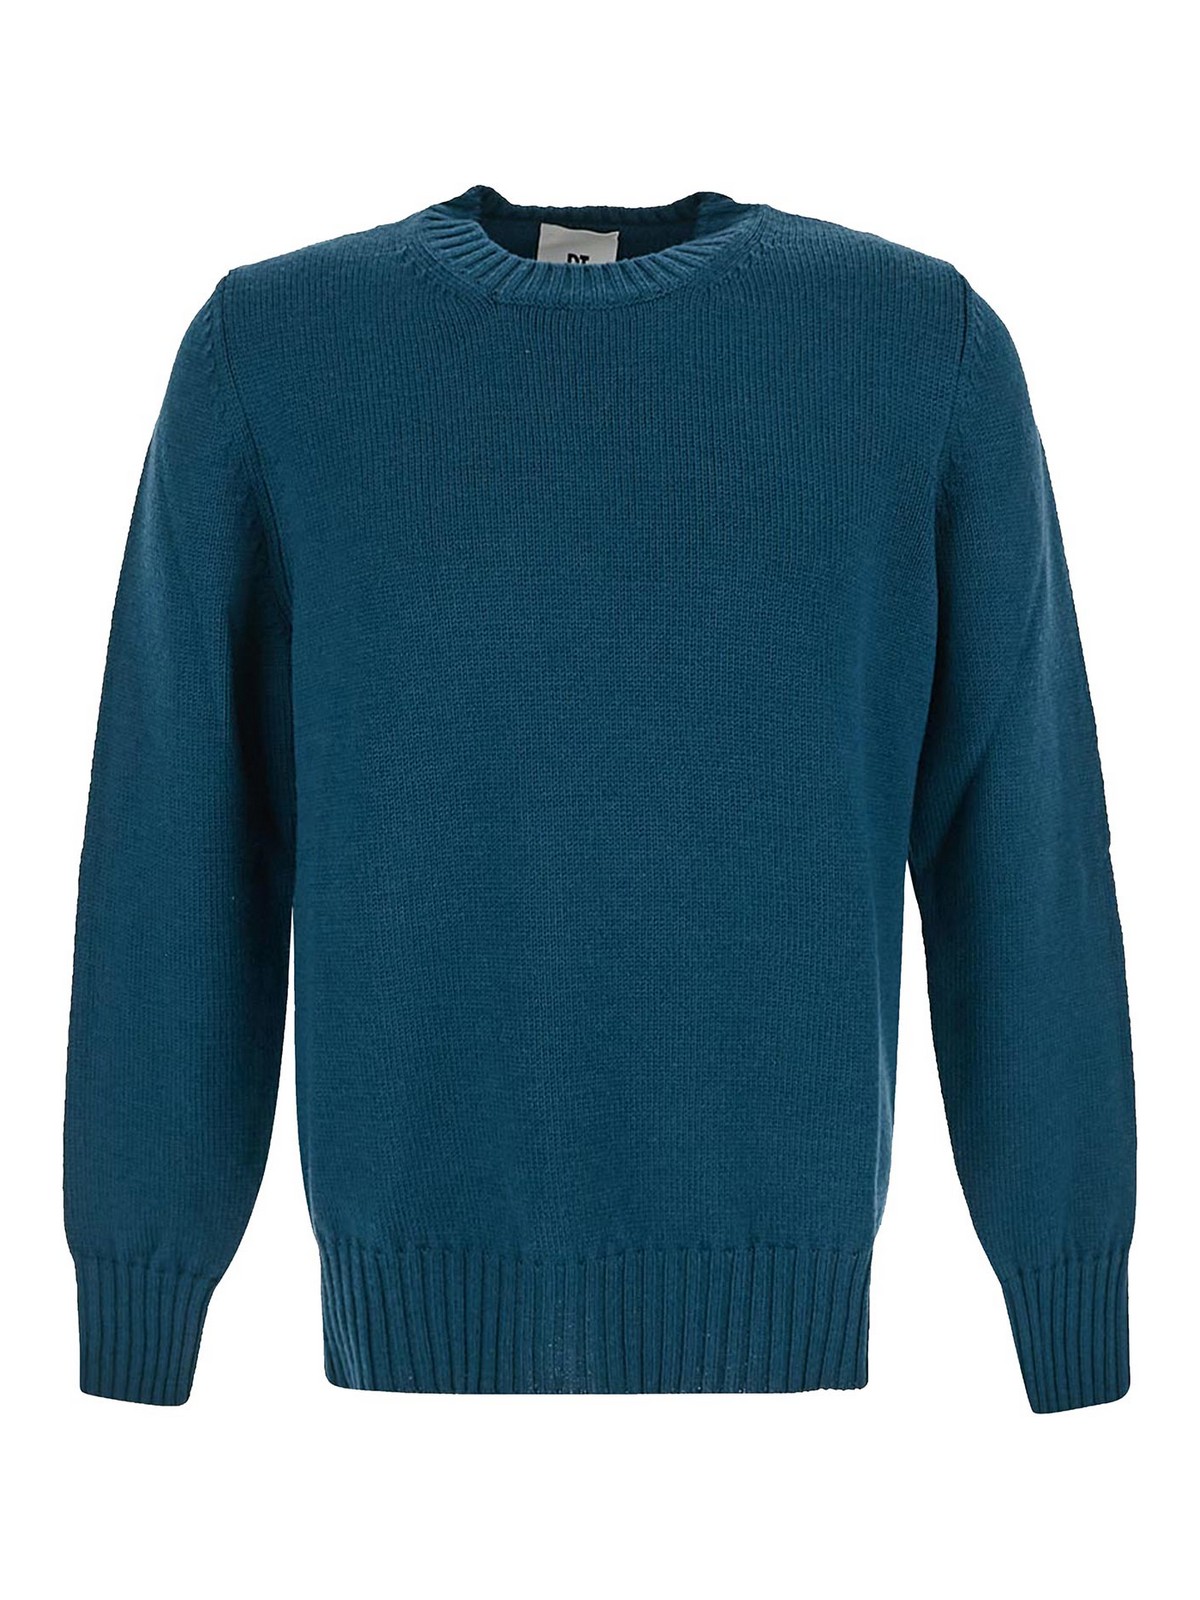 Pt Torino Blue Crewneck With Long Sleeves